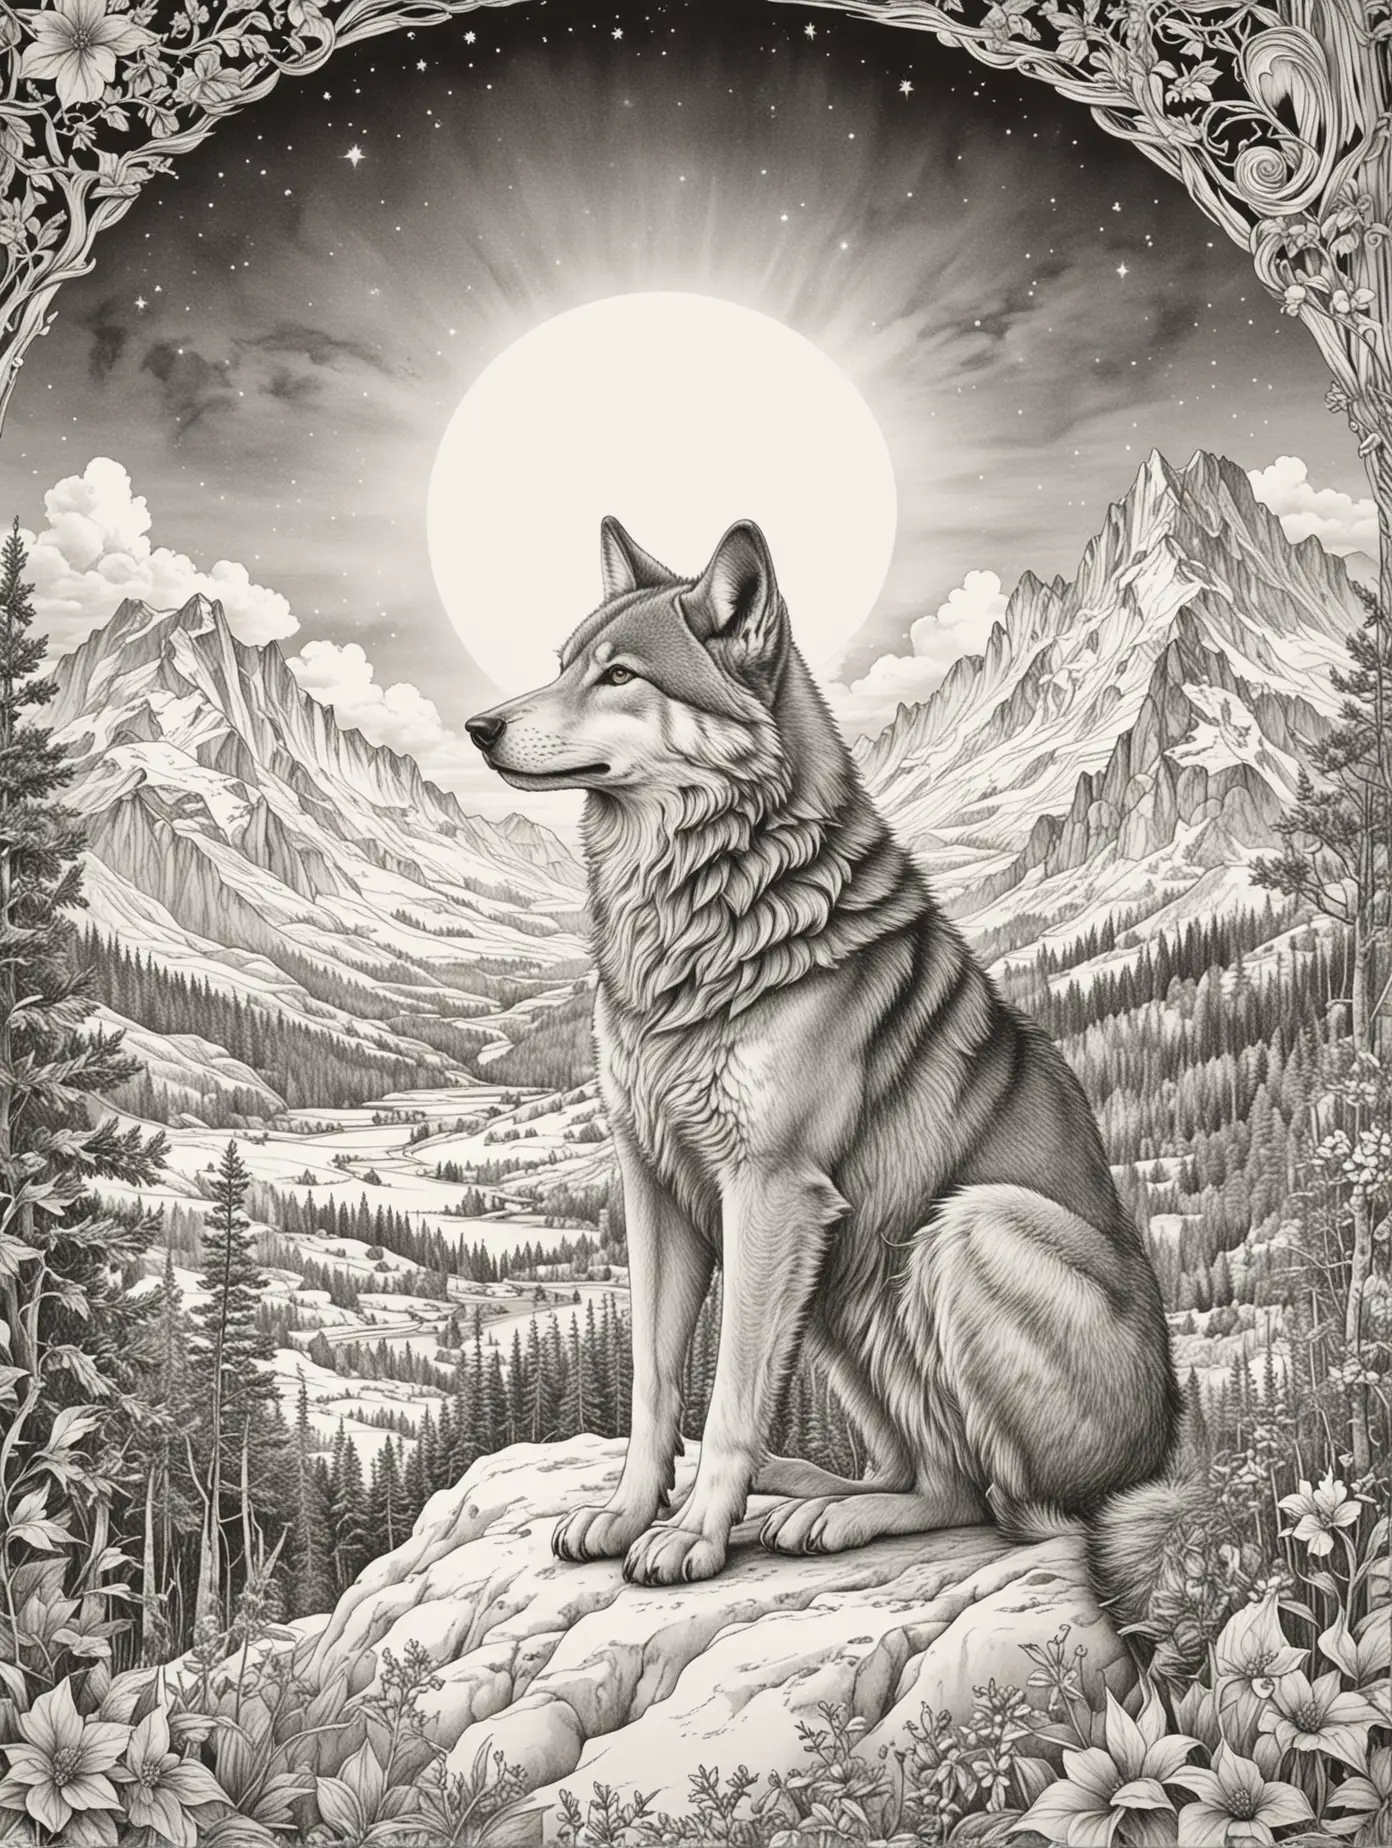 vintage style fairytale colouring book for adults, fairytale scene featuring a wolf sitting and staring at the moon, snow capped mountains in the distance.